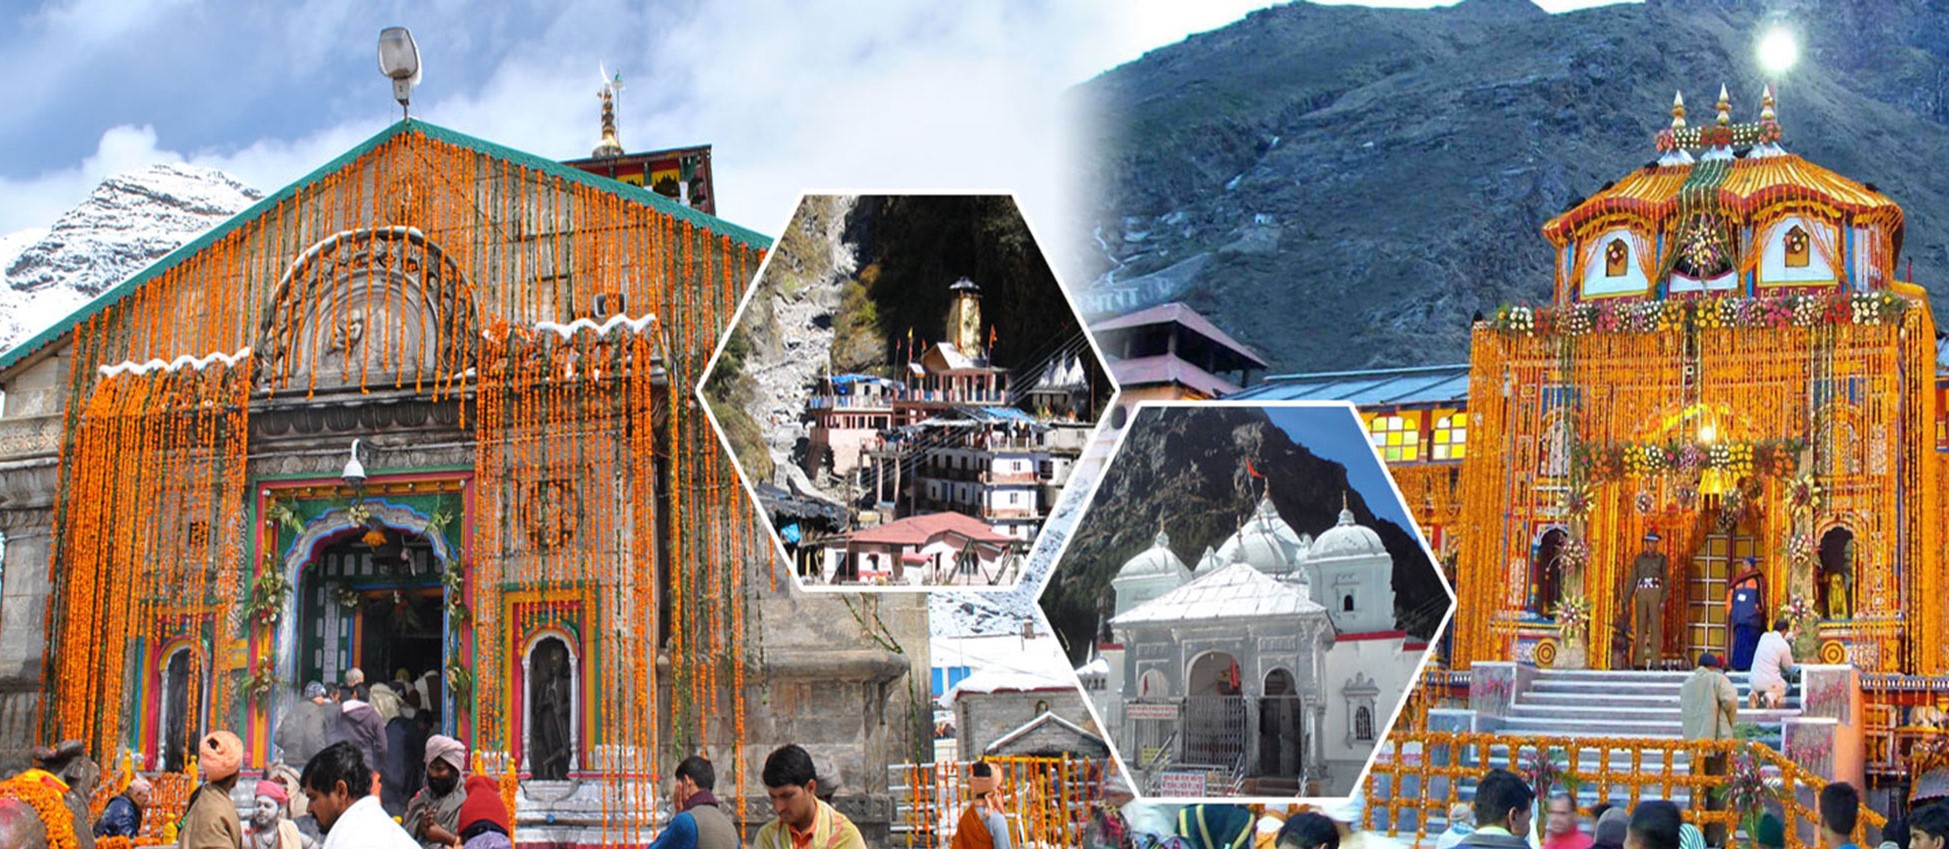 Char Dham yatra package cost